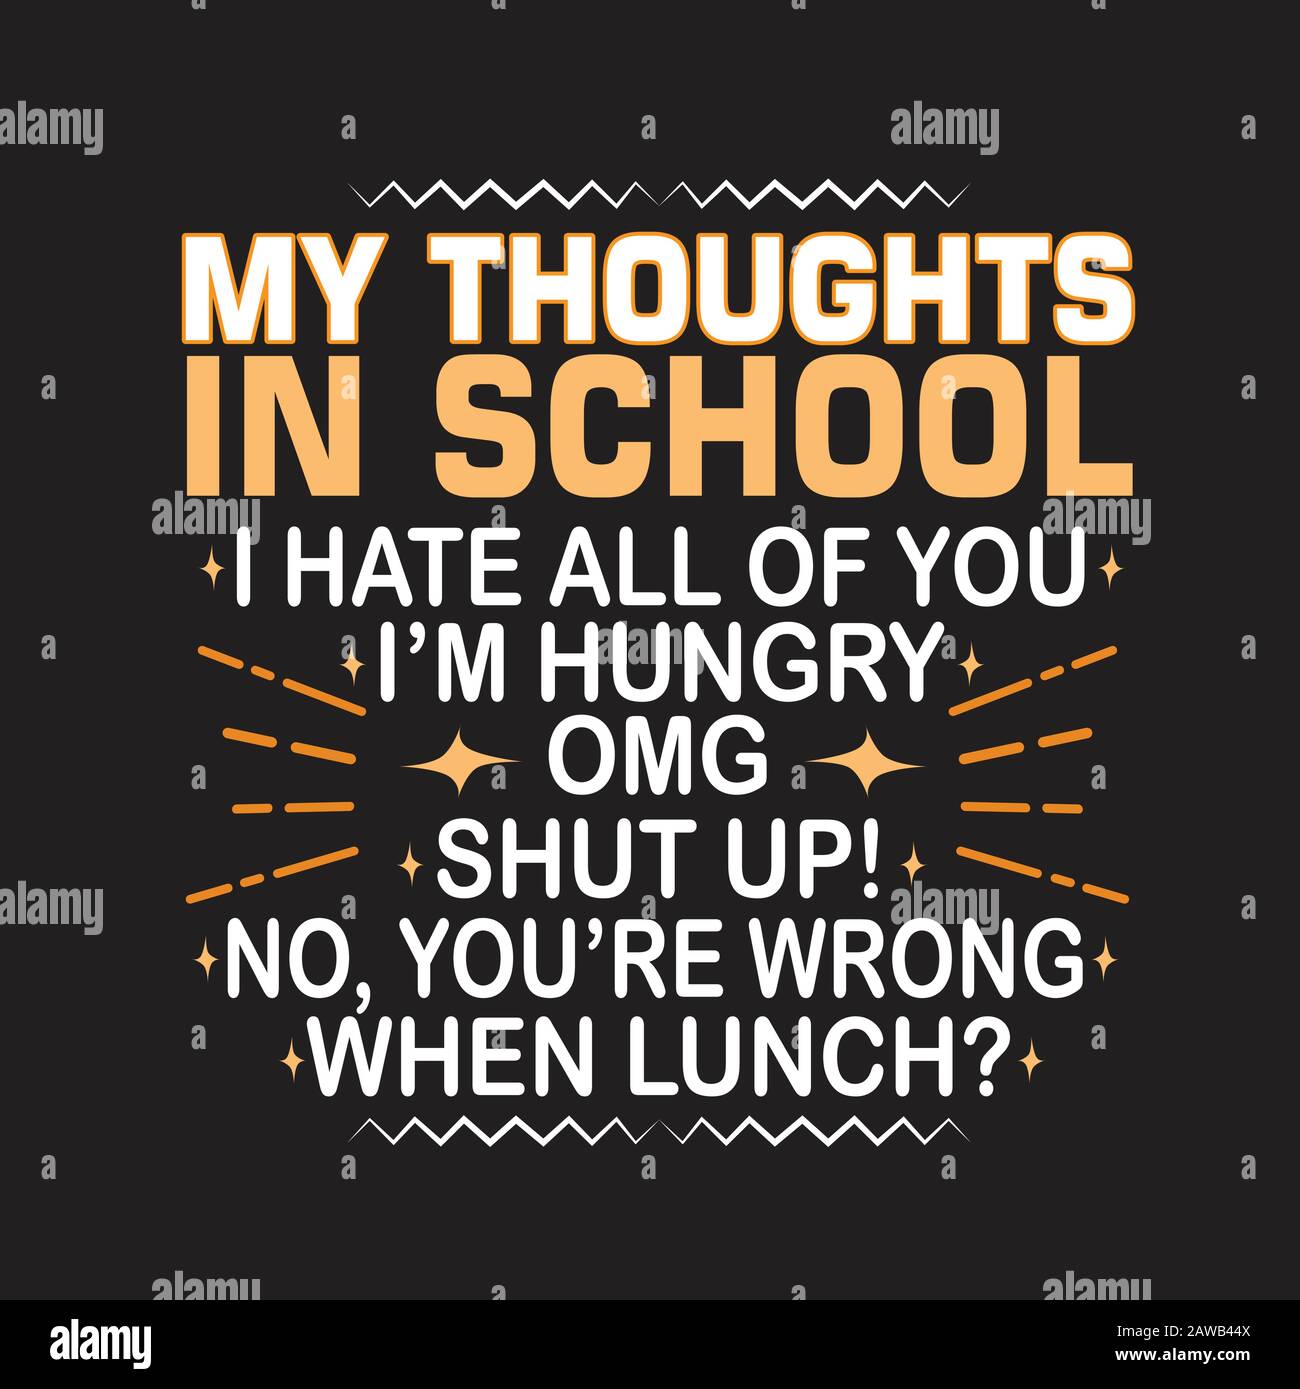 School Quotes and Slogan good for Print. My Thoughts in School I Hate All Of You - I m Hungry - OMG - Shut Up - No, You re Wrong- When Lunch . Stock Vector